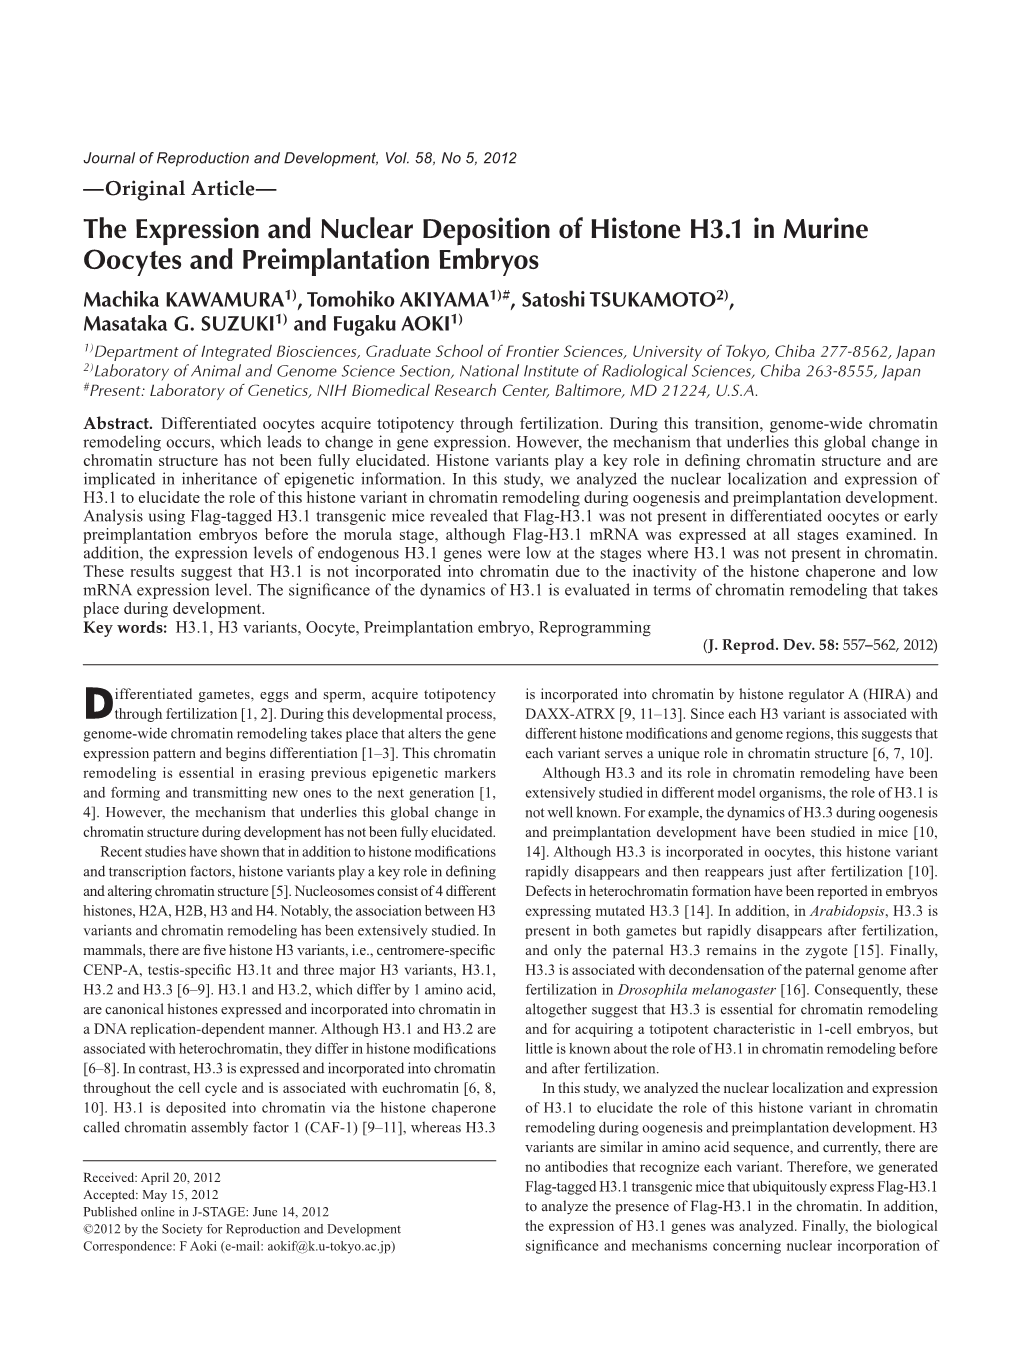 The Expression and Nuclear Deposition of Histone H3.1 In